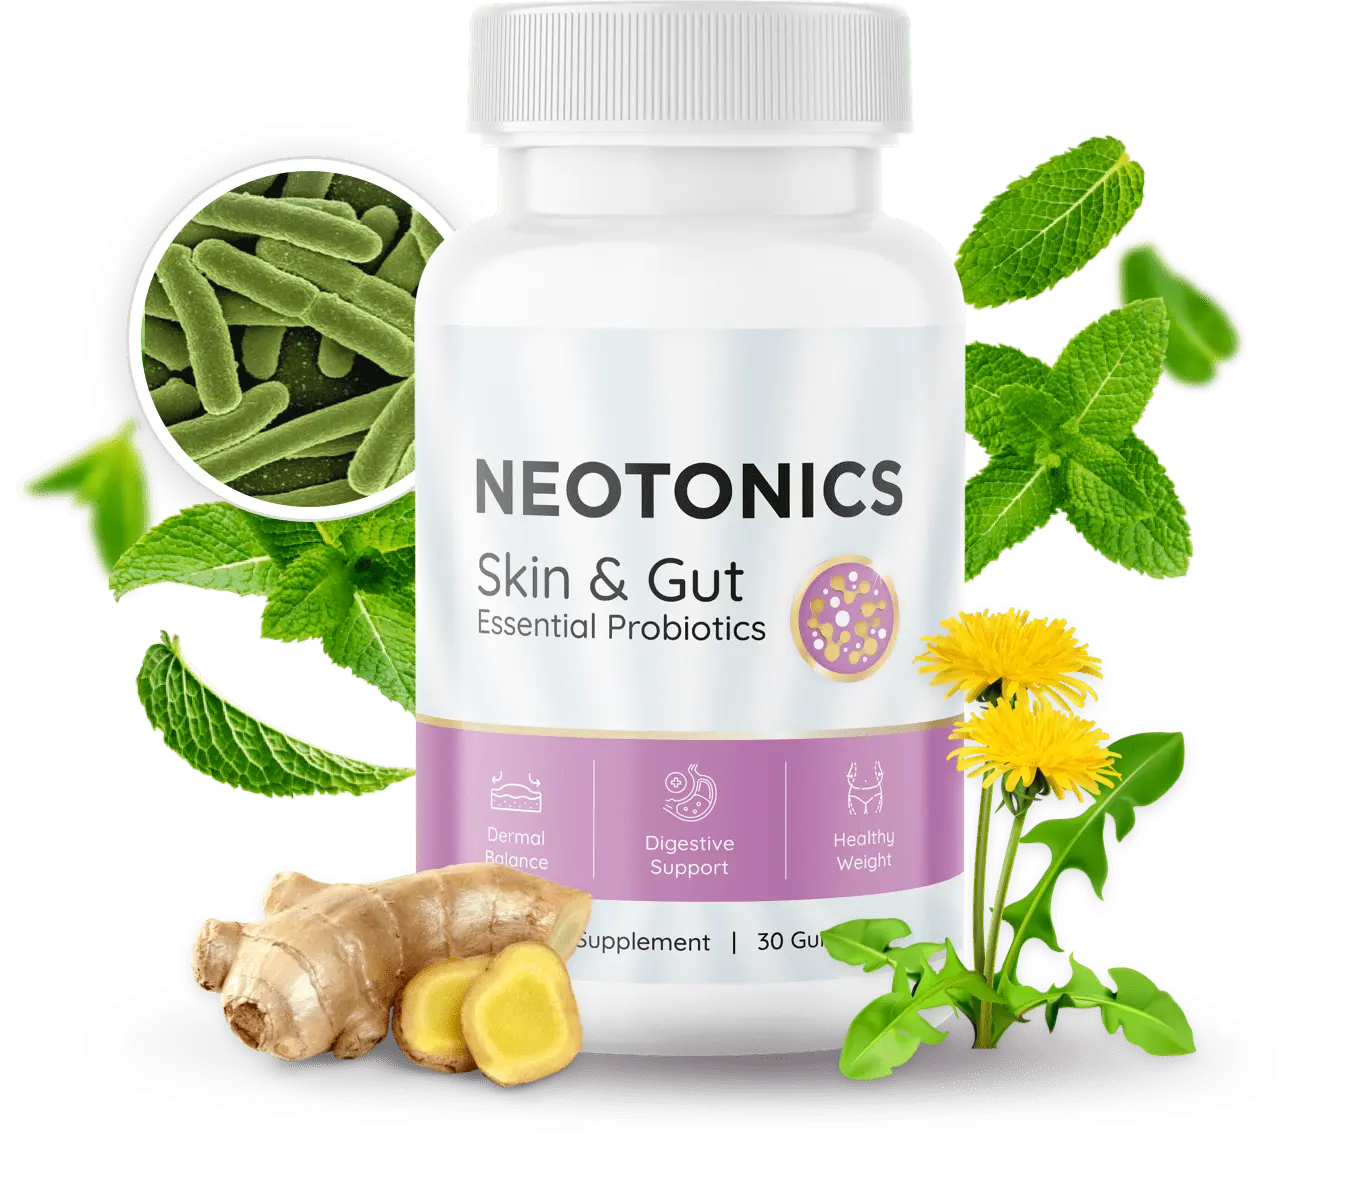 NeoTonics Review: Is It Worth It? Fast-Acting Results and Honest Reviews